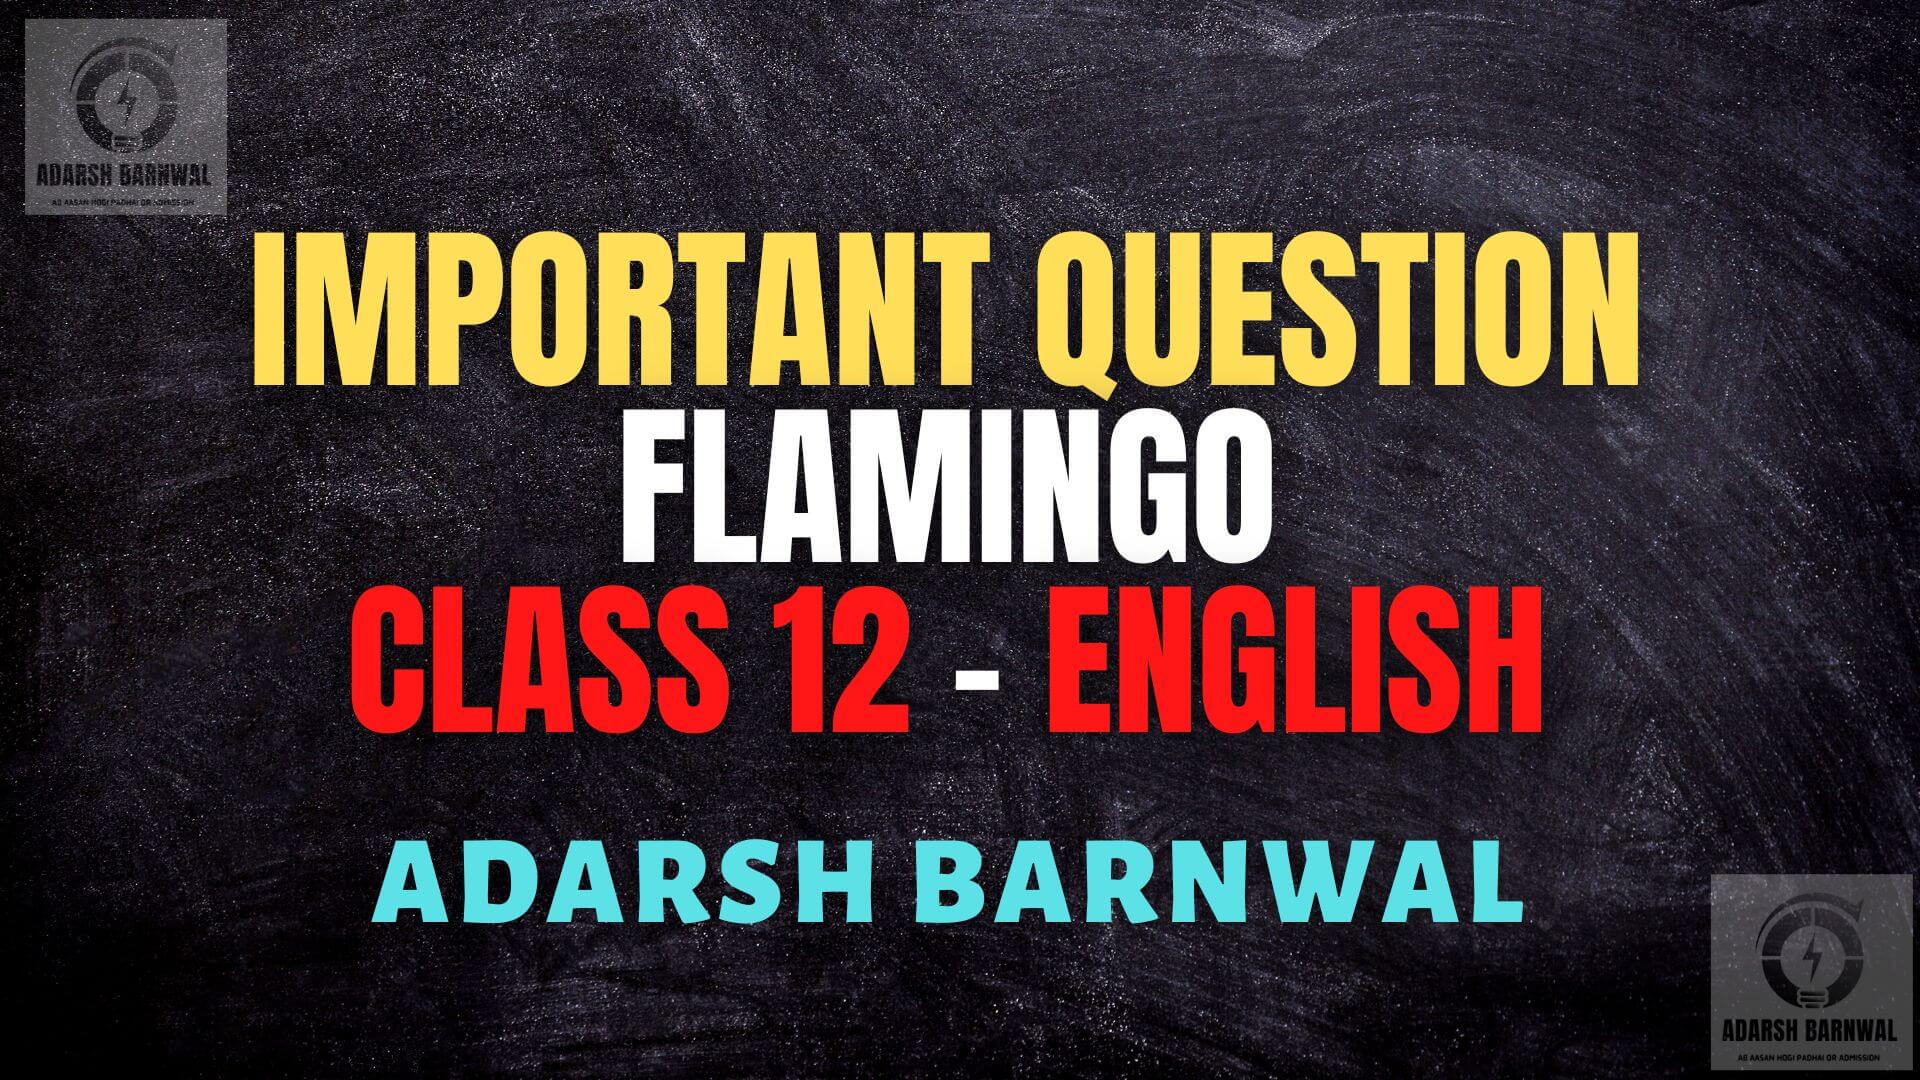 Flamingo Class 12 English Important questions Pdf by Adarsh Barnwal